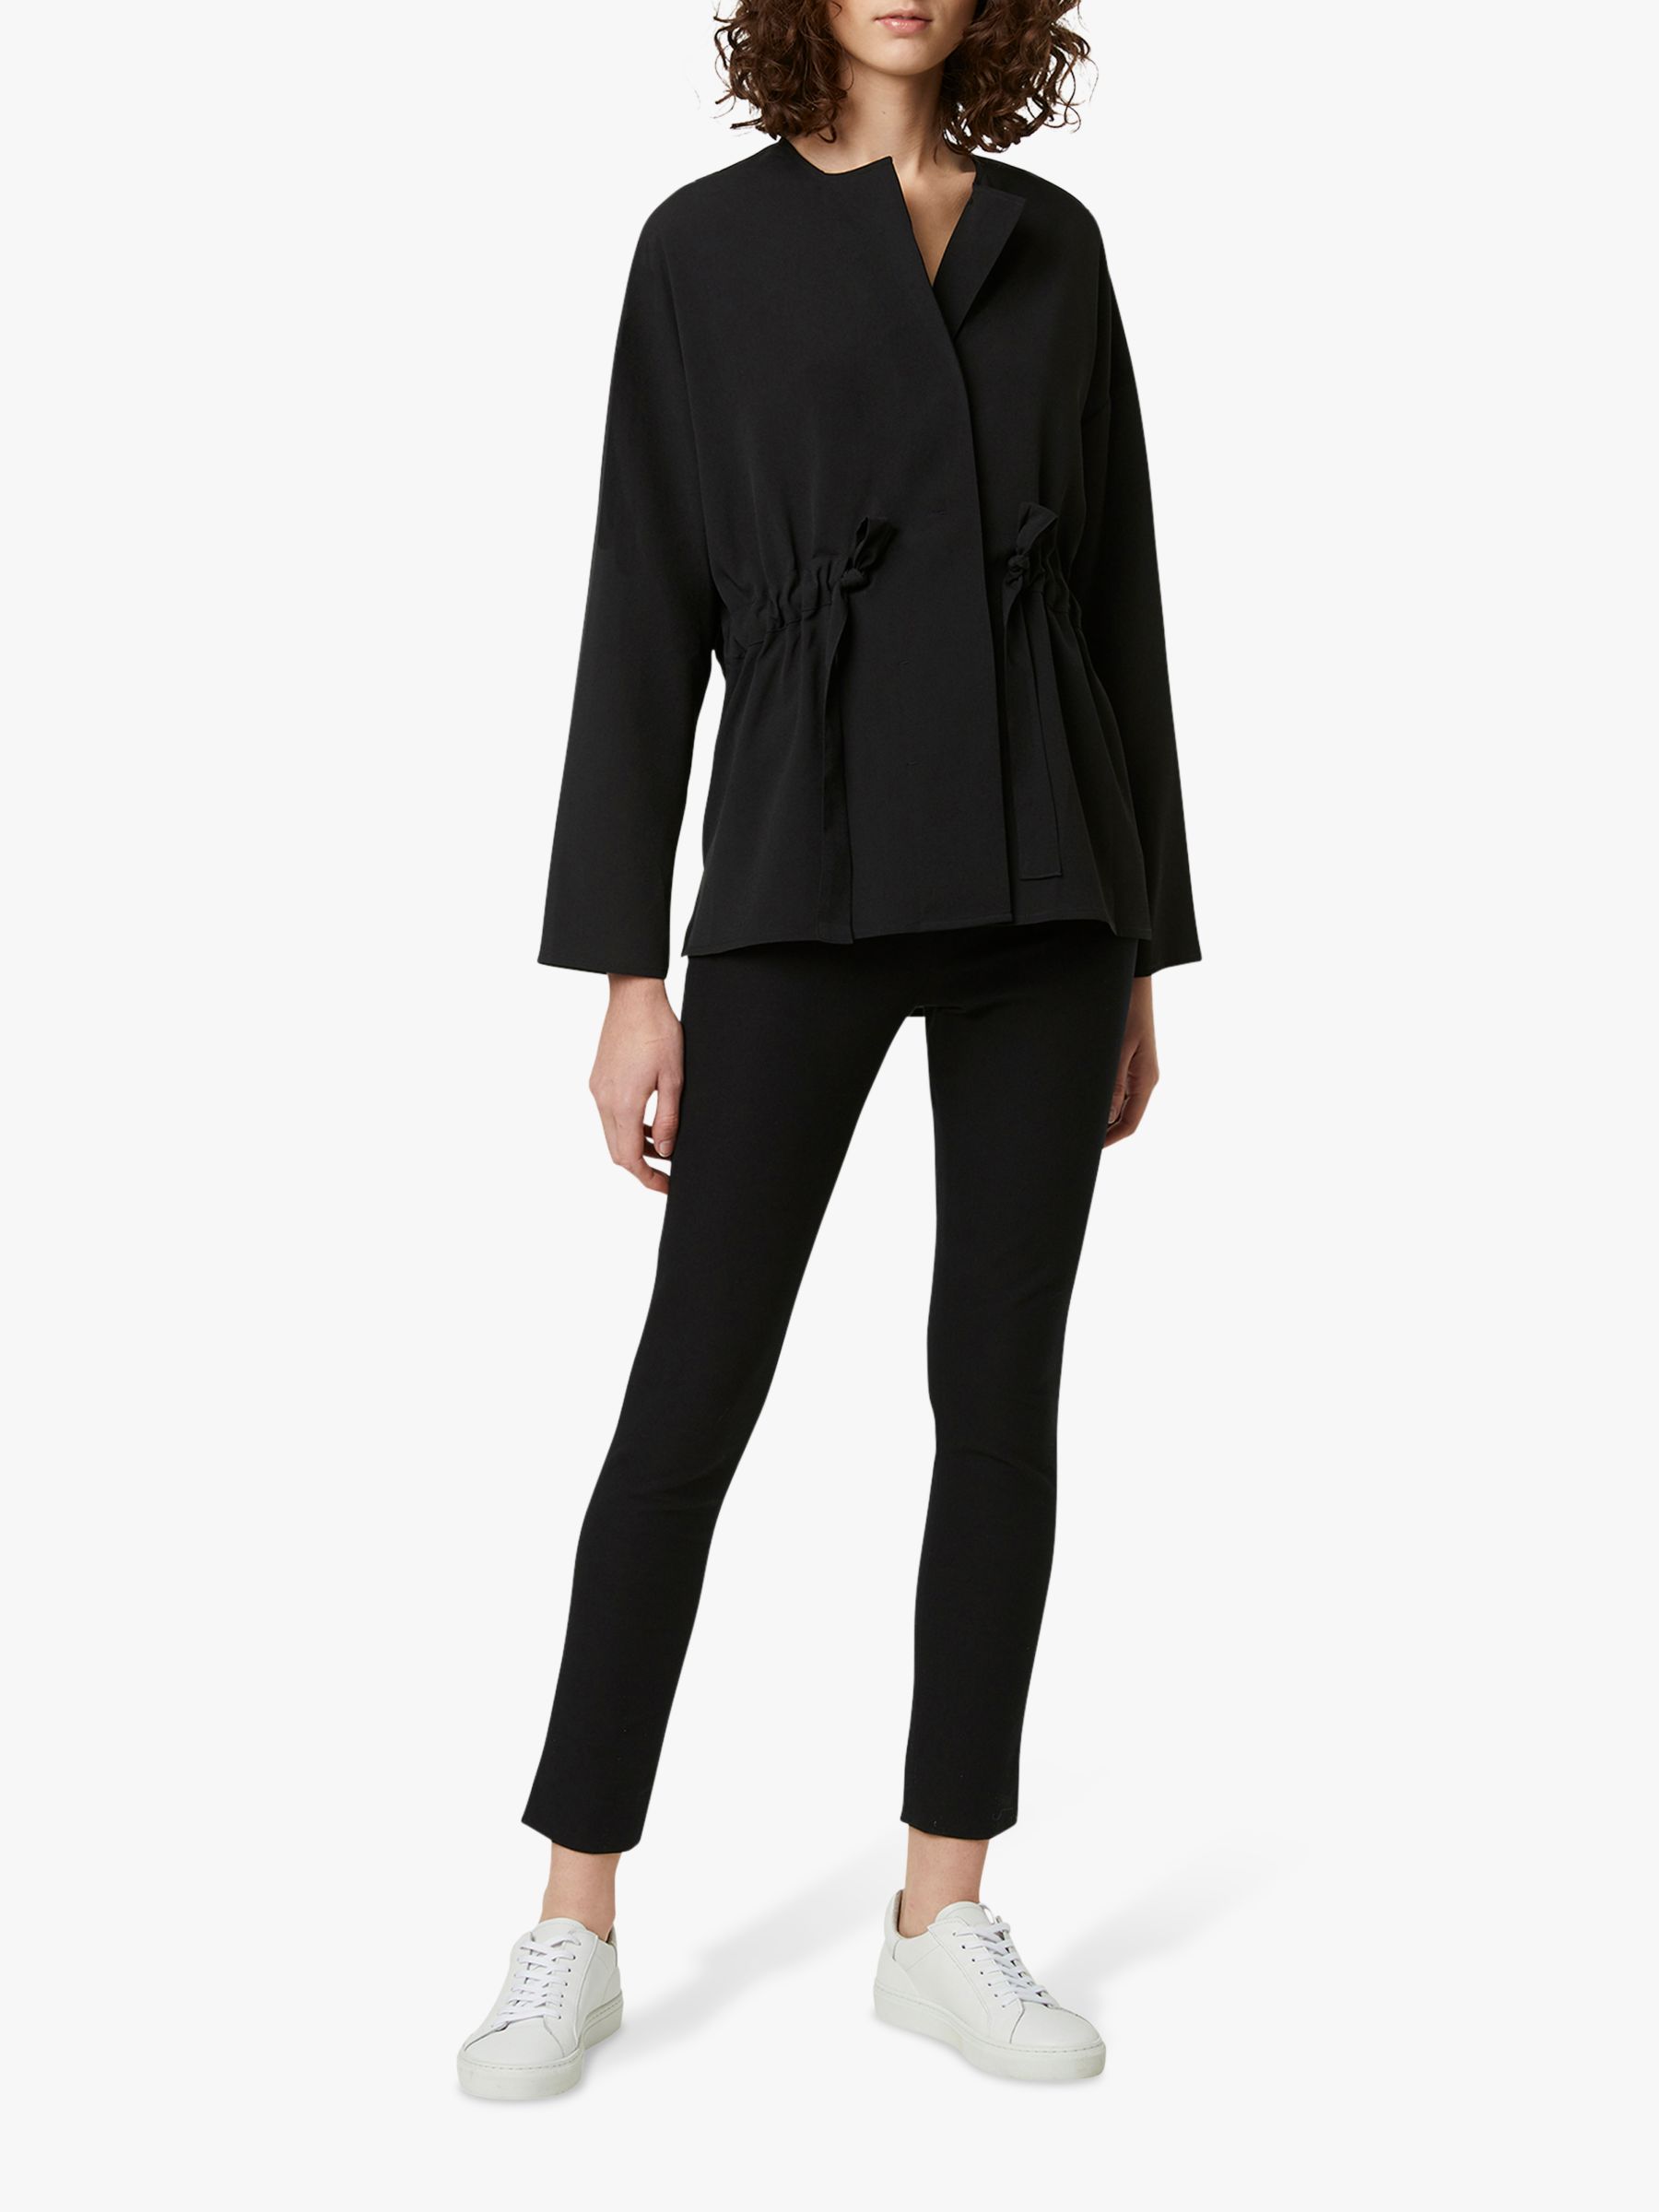 French Connection Crepe Gathered Waist Blouse, Black, S